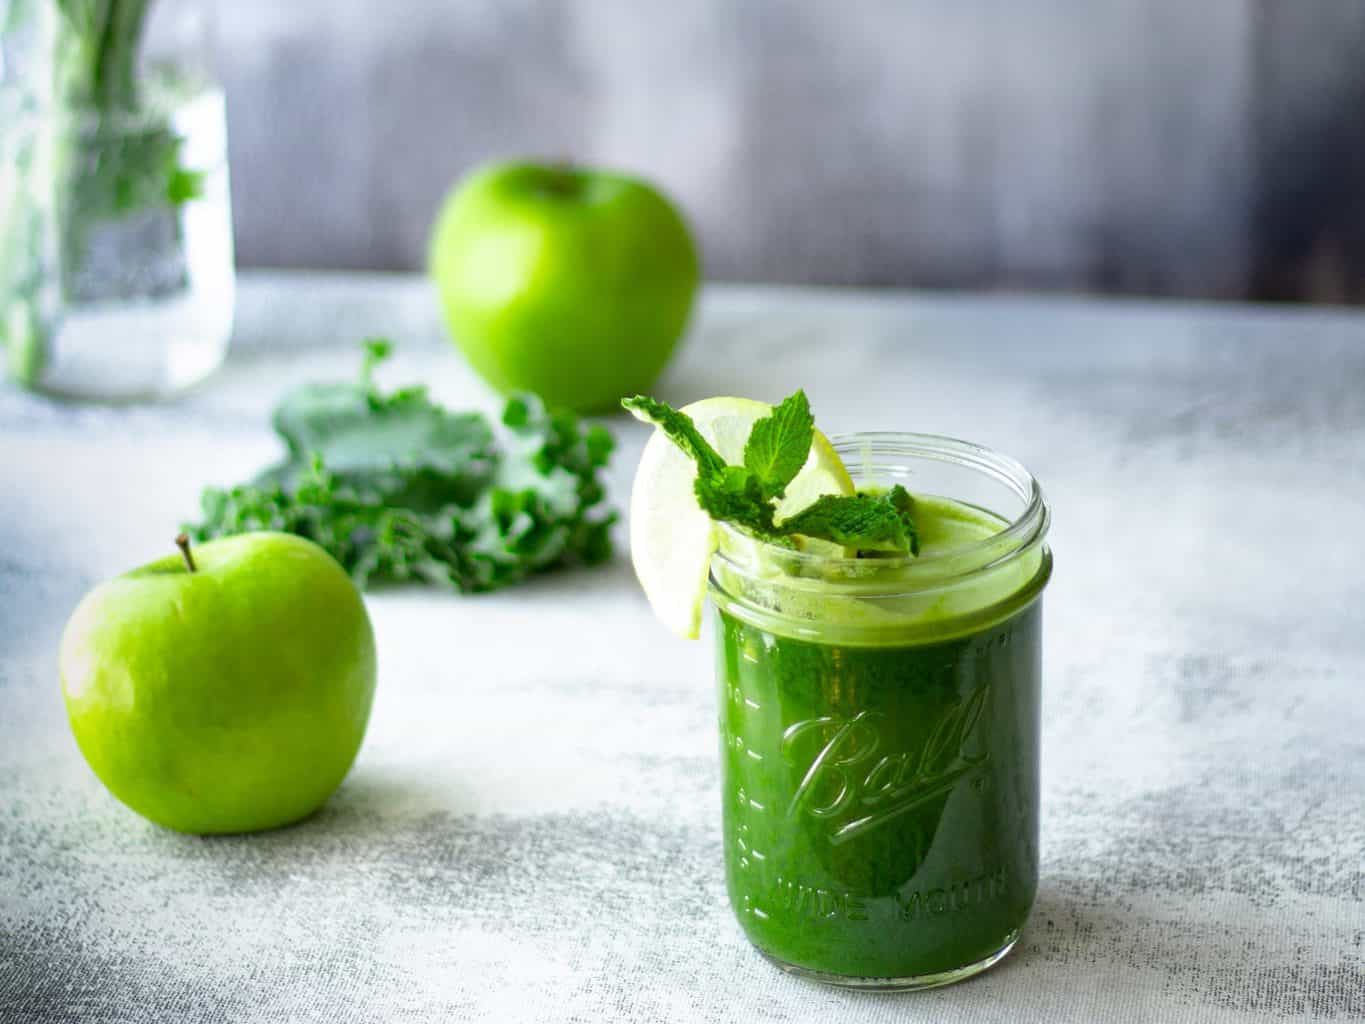 Green Smoothie Recipe That Your Kids Will Love!